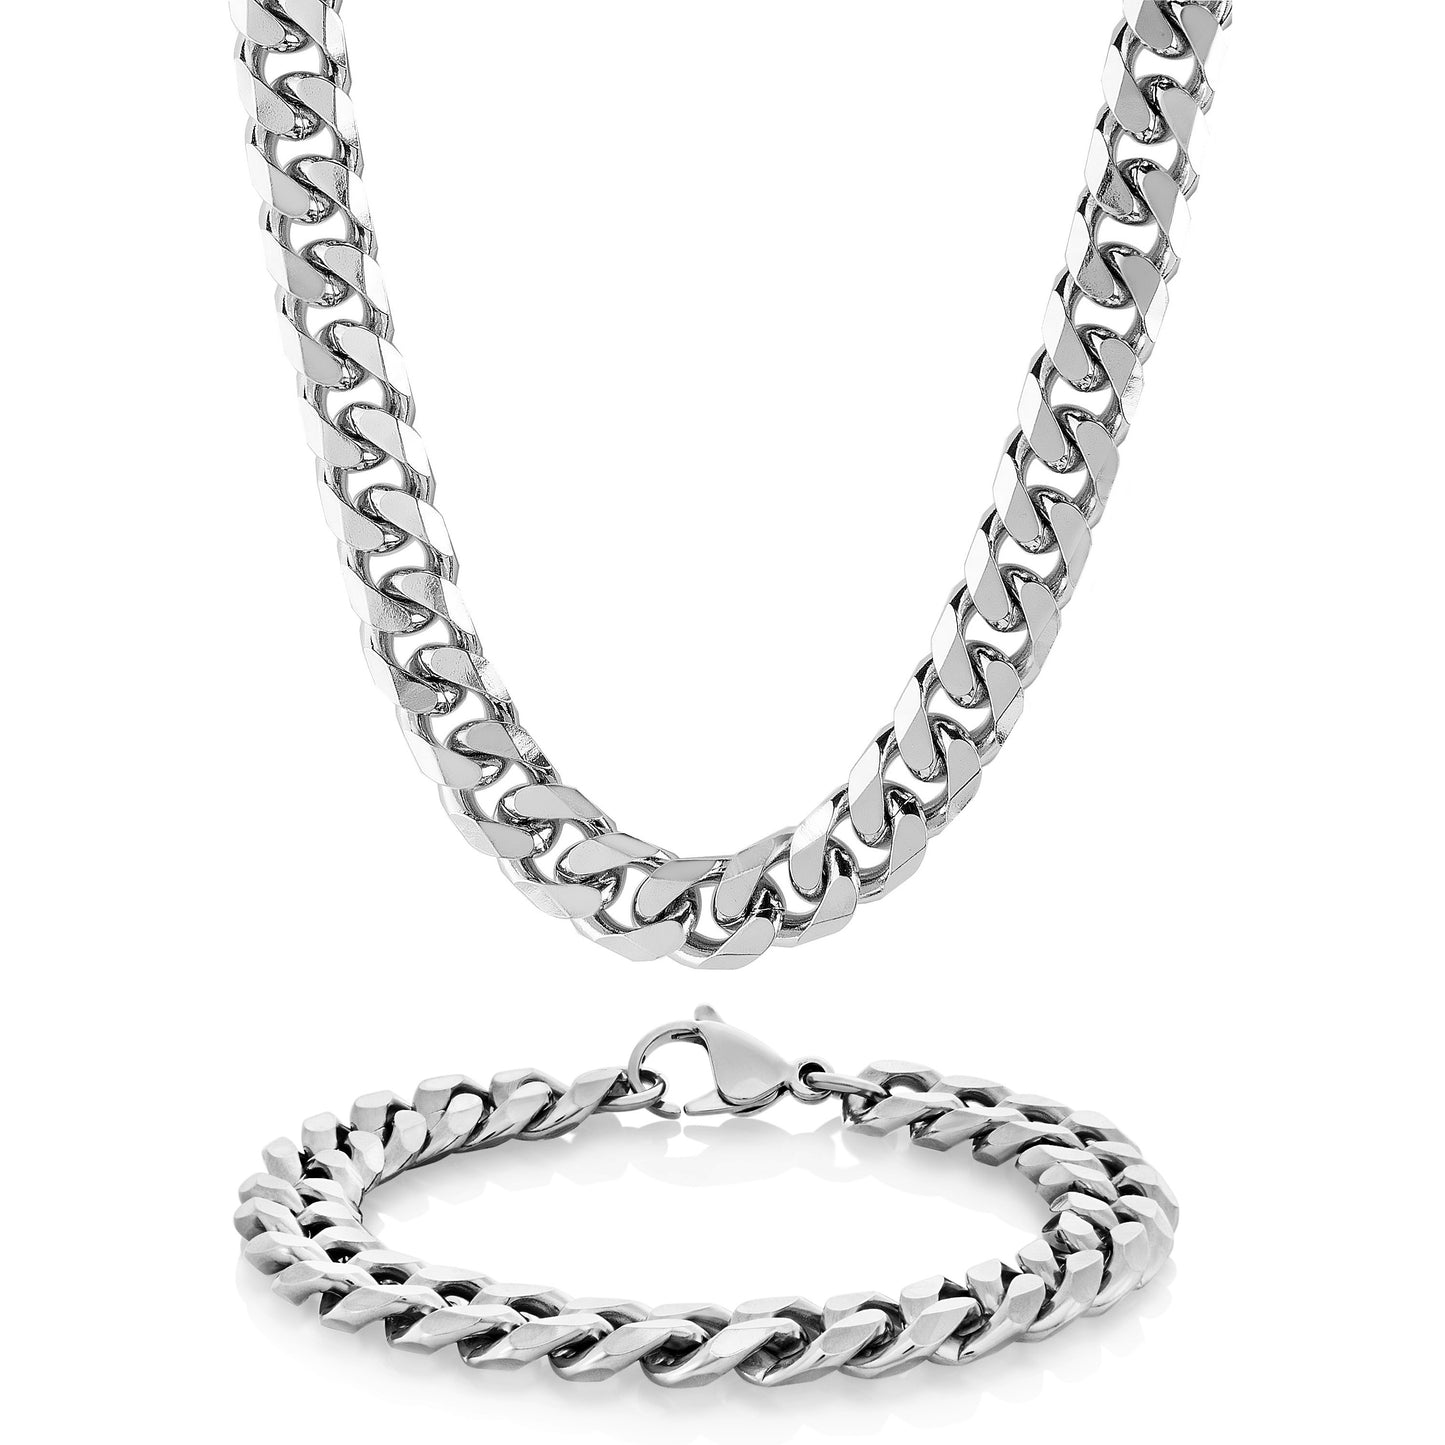 Men's Cuban Curb Stainless Steel Bracelet and Necklace Chain Set - (10mm)